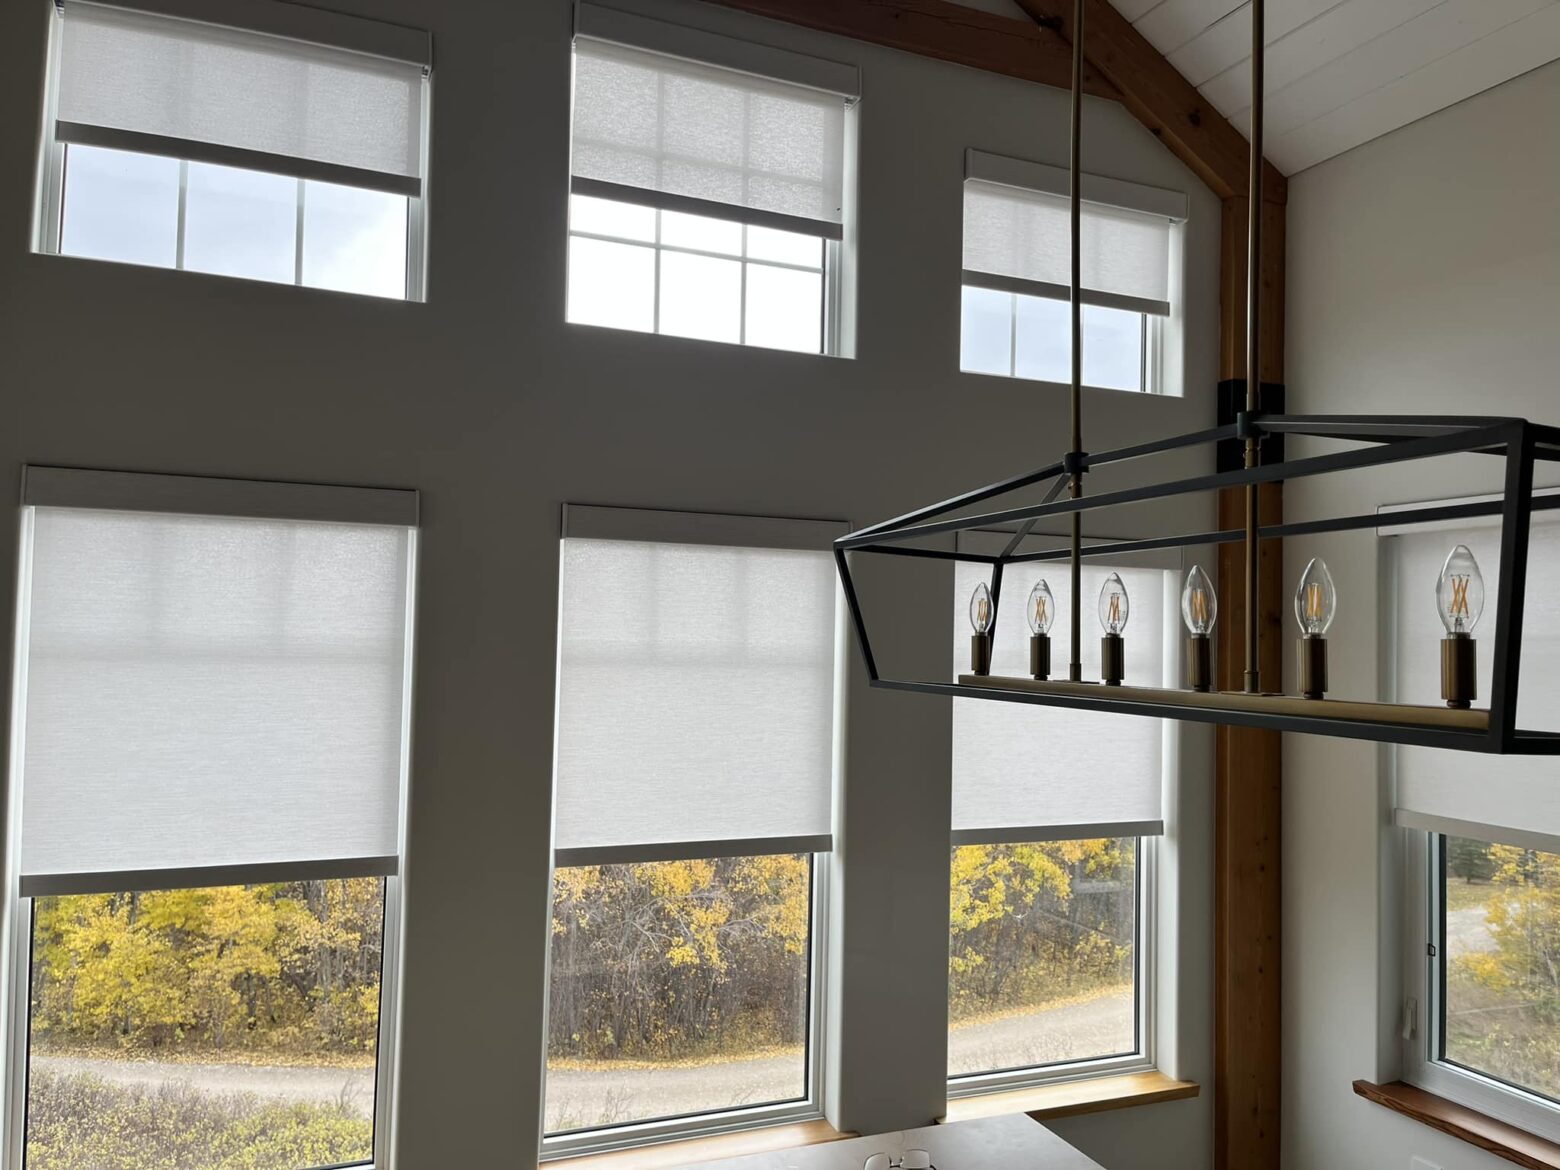 Automated shades applied to six different windows in a dining room setting.